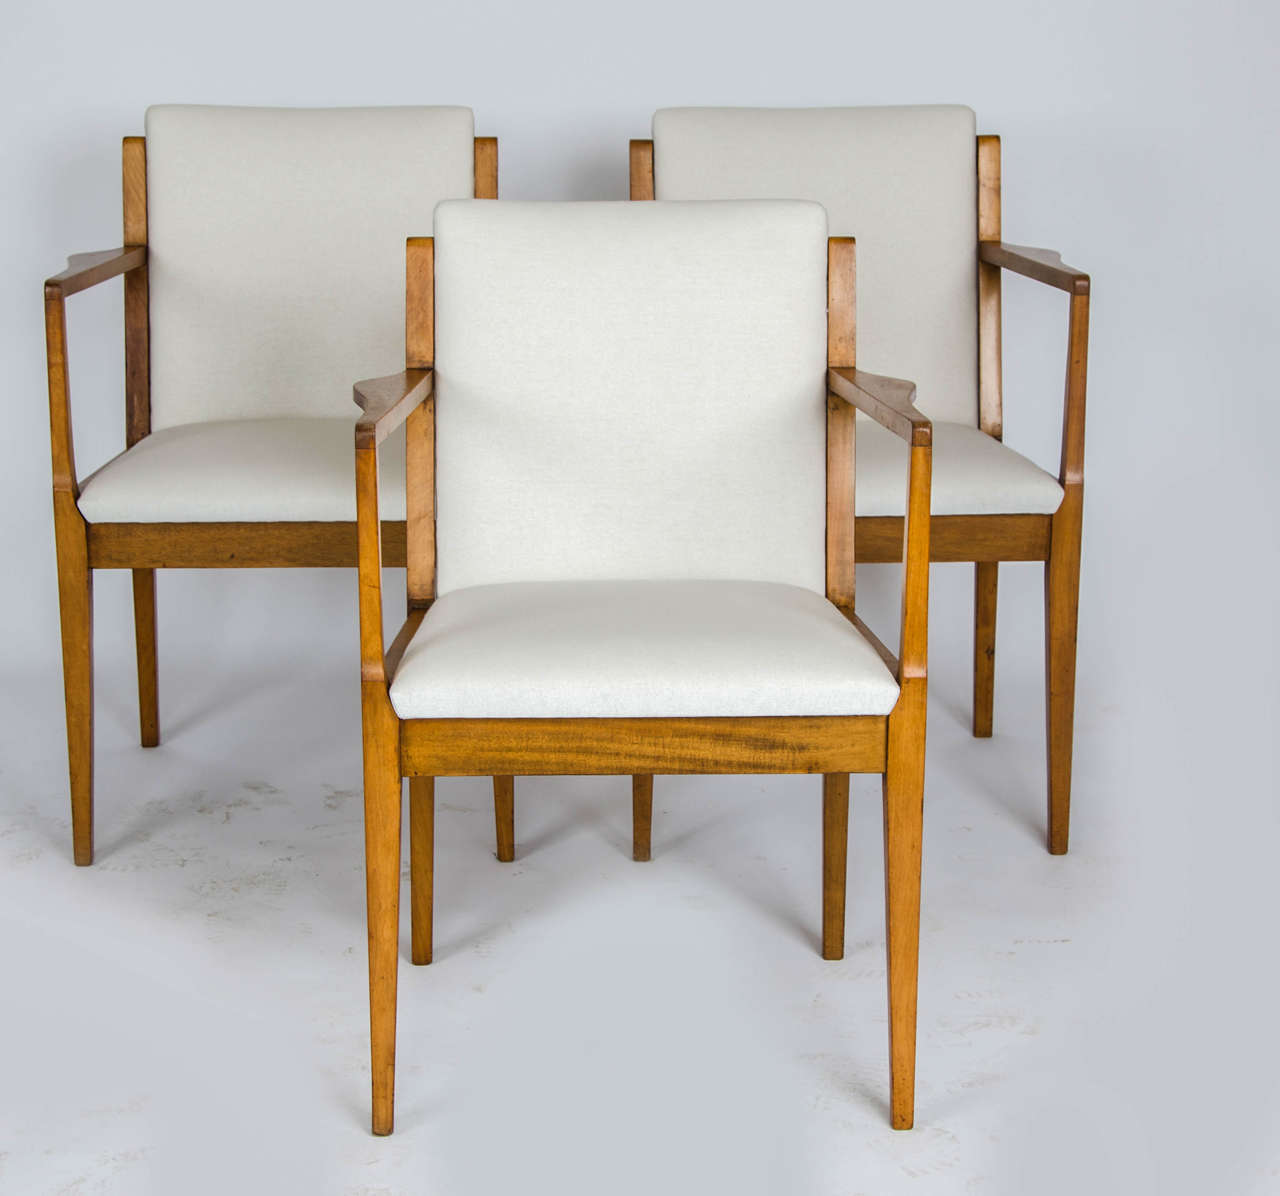 A Heals of Tottenham Court Road teak dining table and six matching carver chairs. This set matches the Heals sideboard, also available on the Reload storefront. All sourced from the same Leicestershire estate.
Table Dimensions: 166cm(L) x 100cm(W)